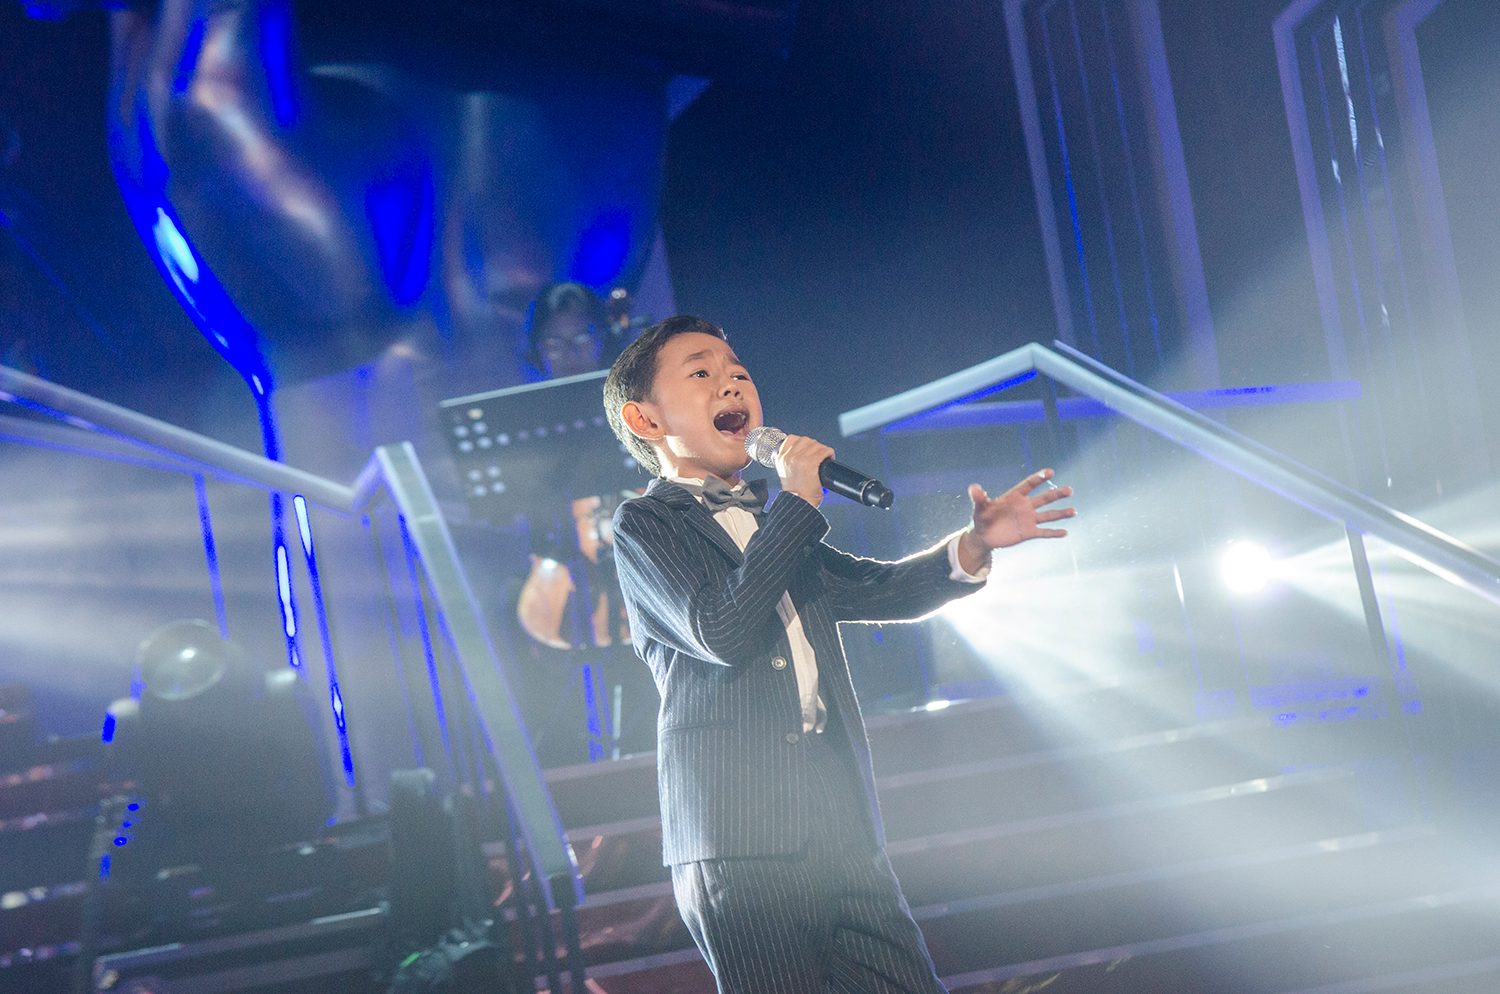 IN PHOTOS: Emotional ‘Voice Kids PH’ win for Team Lea